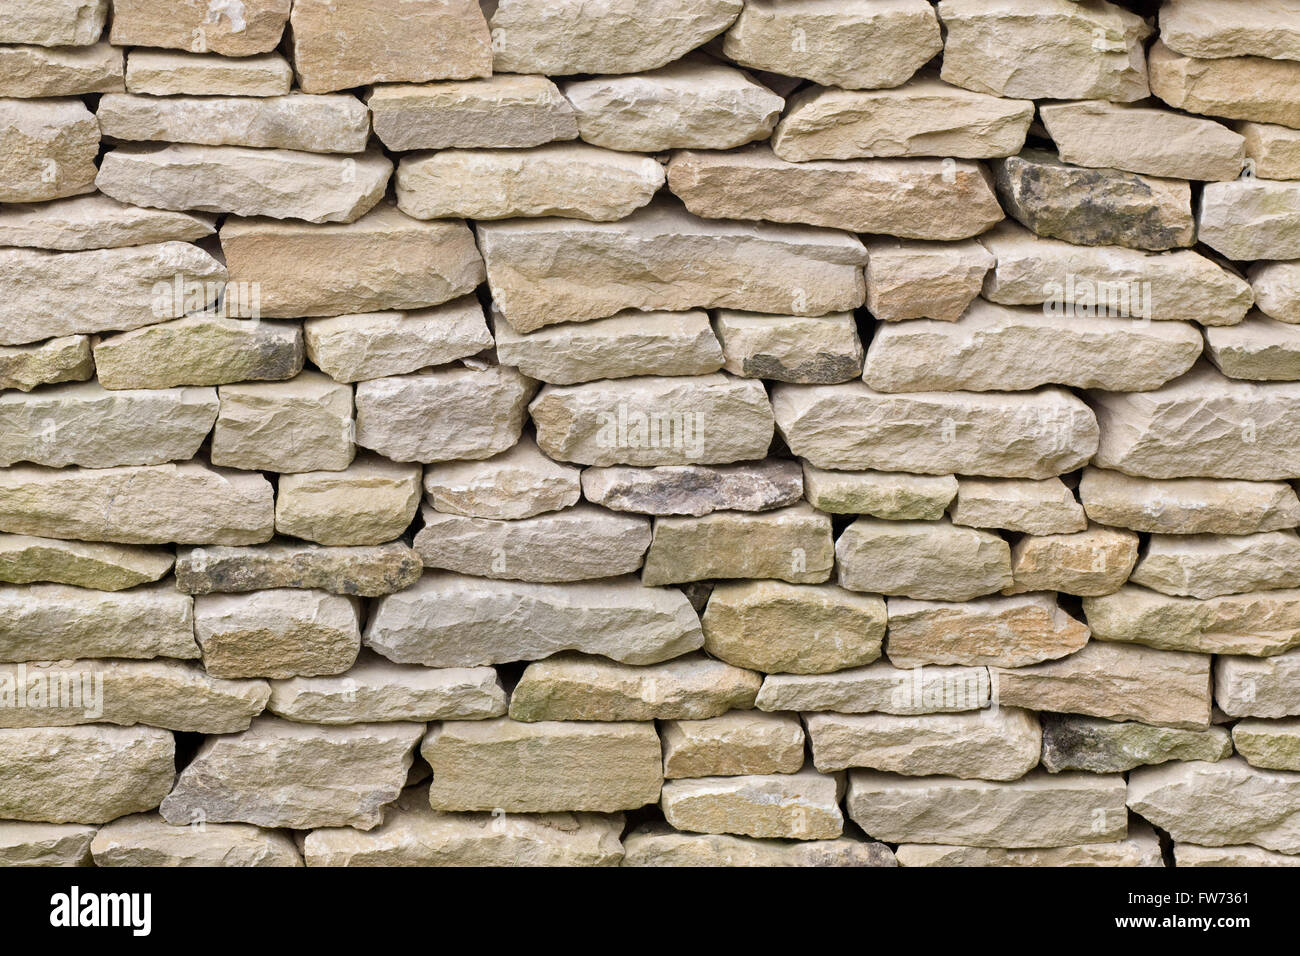 Dry stone wall, Cotswold stone Stock Photo